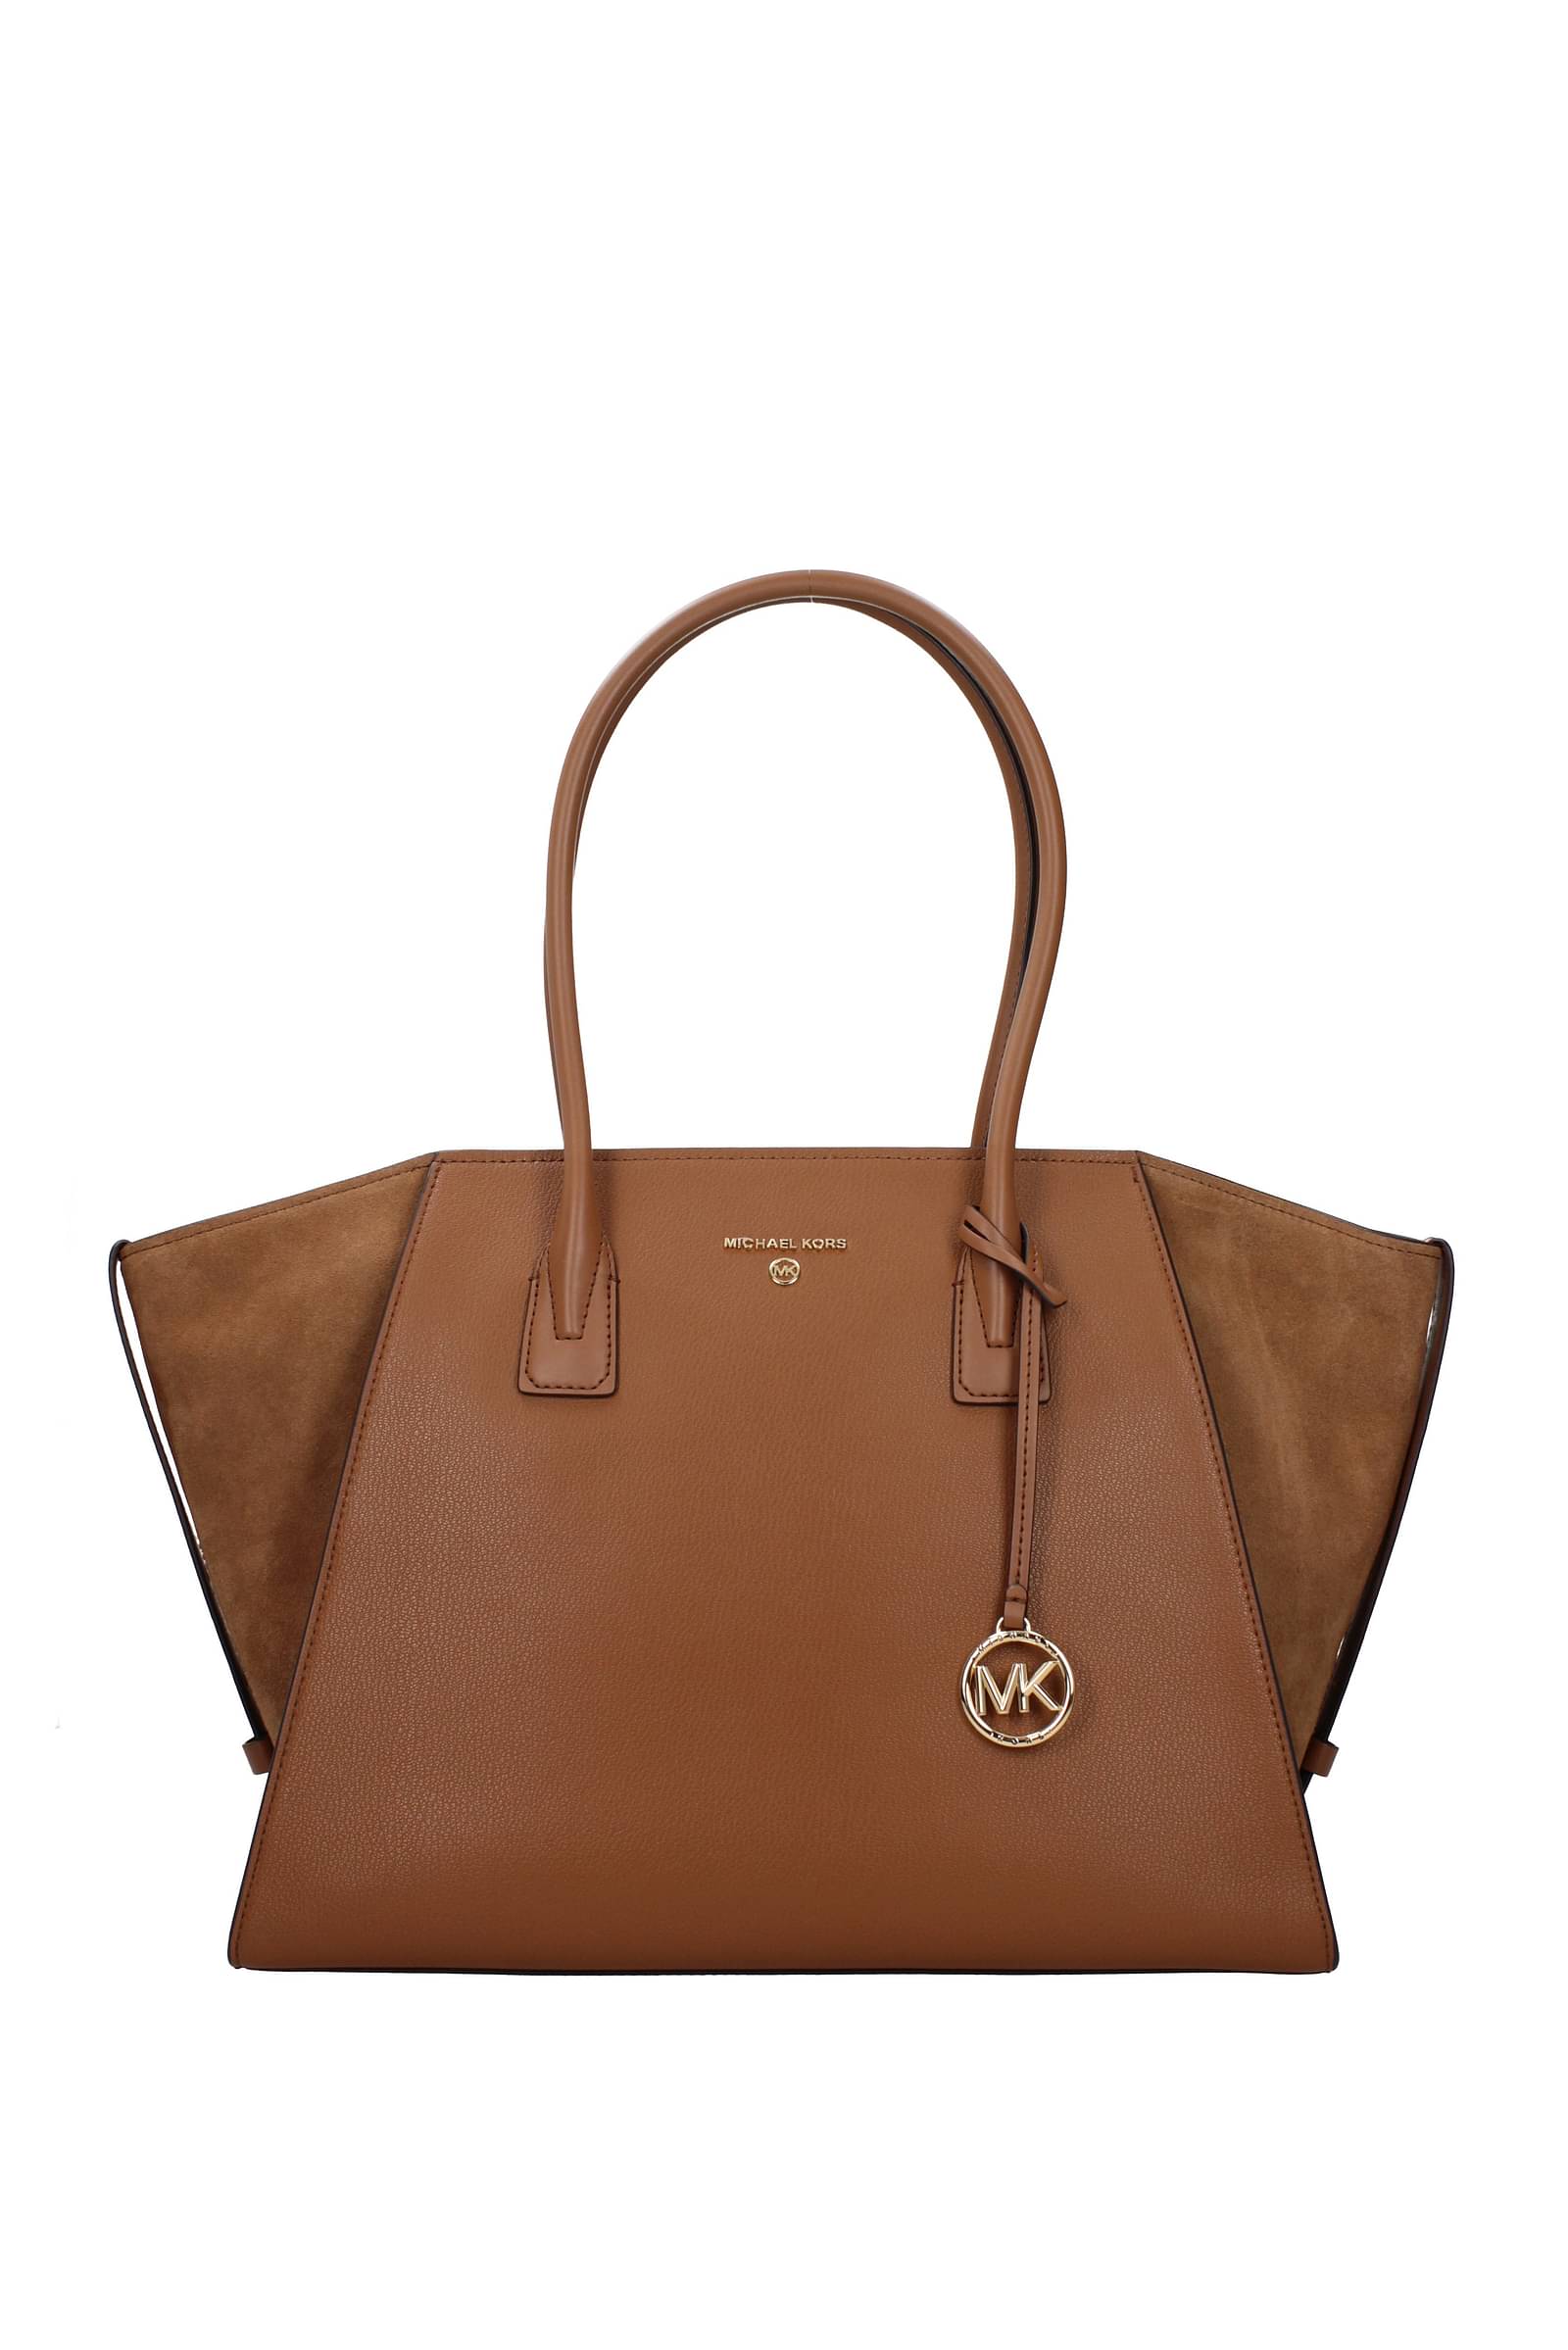 5 Michael Kors Handbags You Can Buy for Under $200 During Their Semi-Annual  Sale